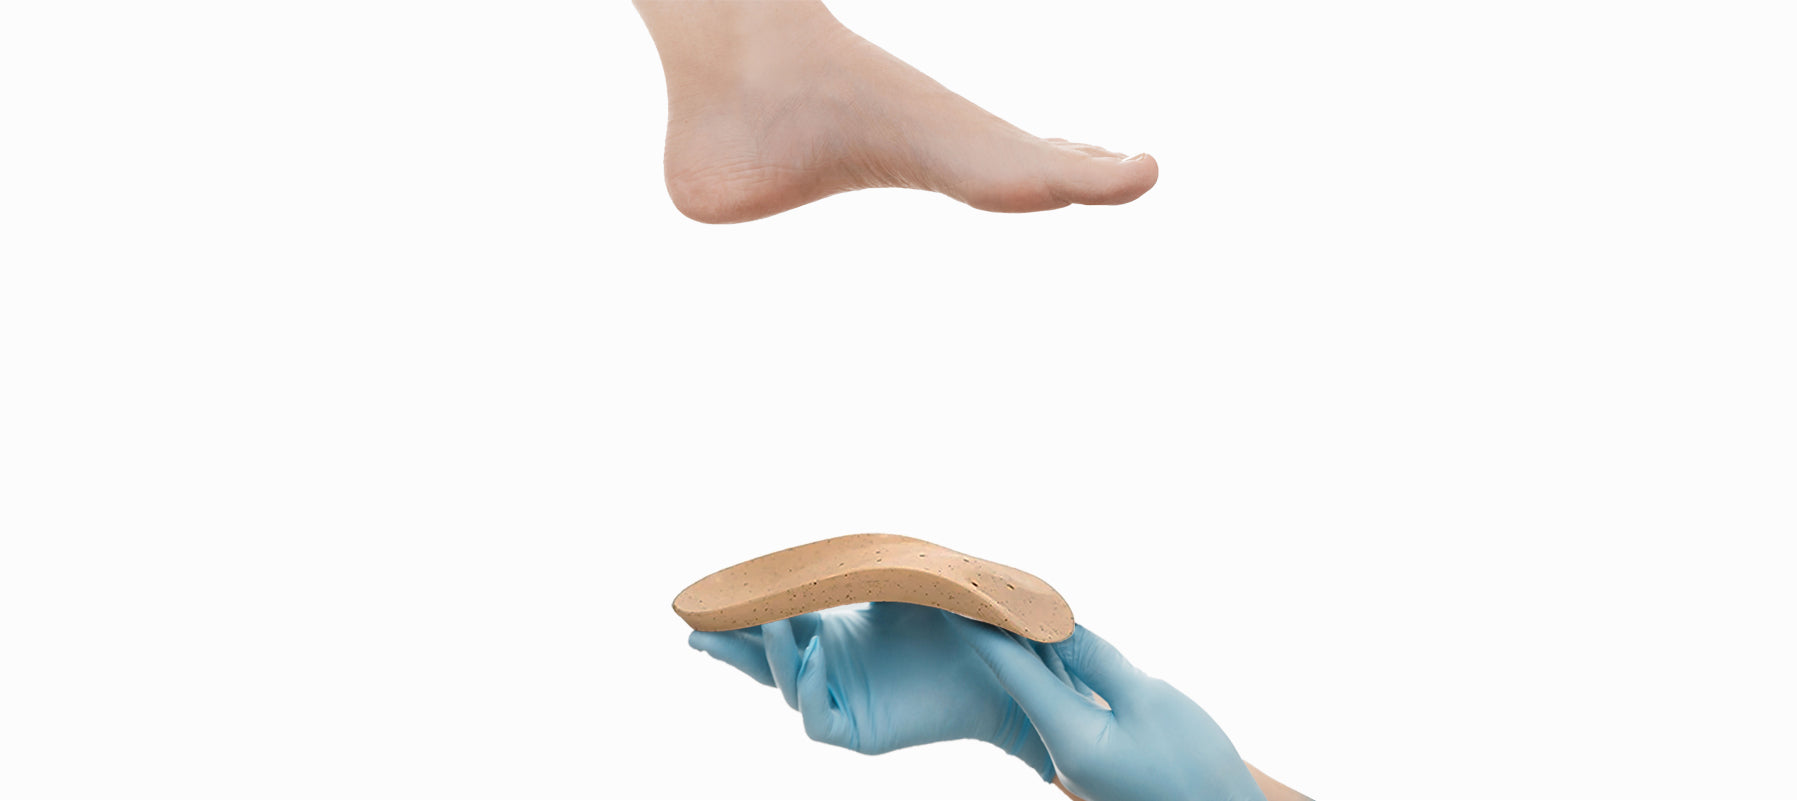 Orthotic arch supports for treating plantar fasciitis and reducing foot pain